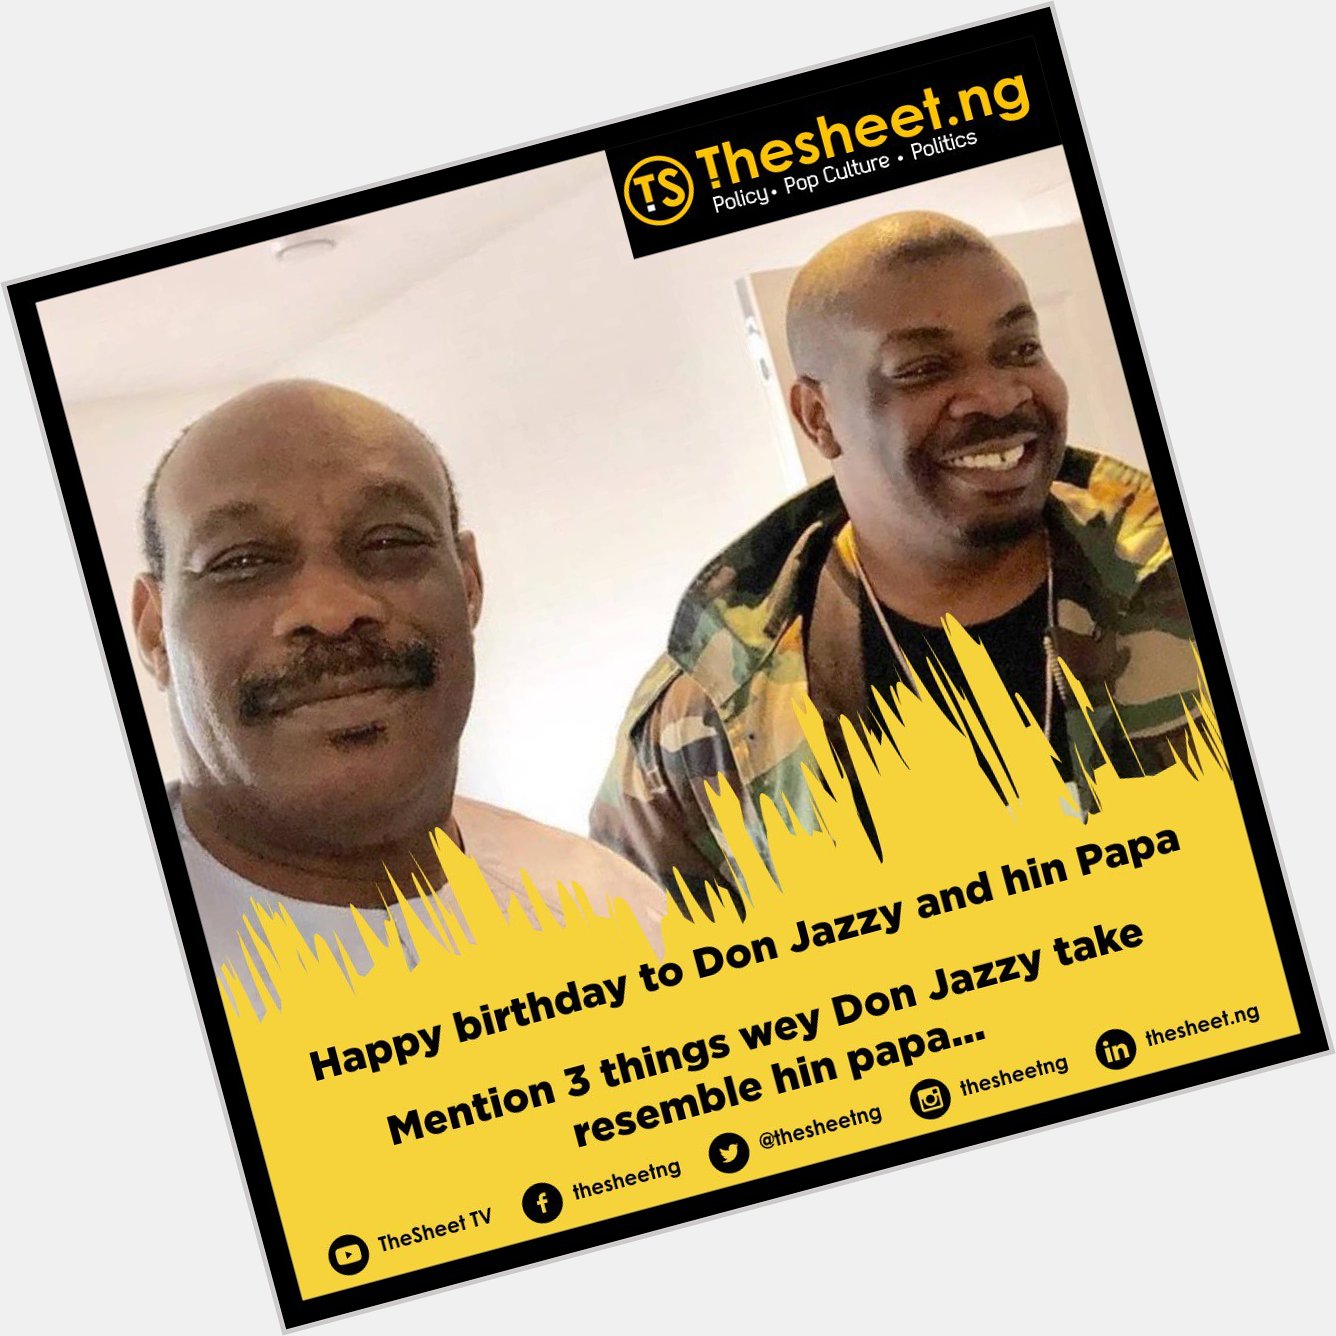 Happy birthday to # and hin Papa

Mention 3 things wey Don Jazzy take resemble hin papa... 